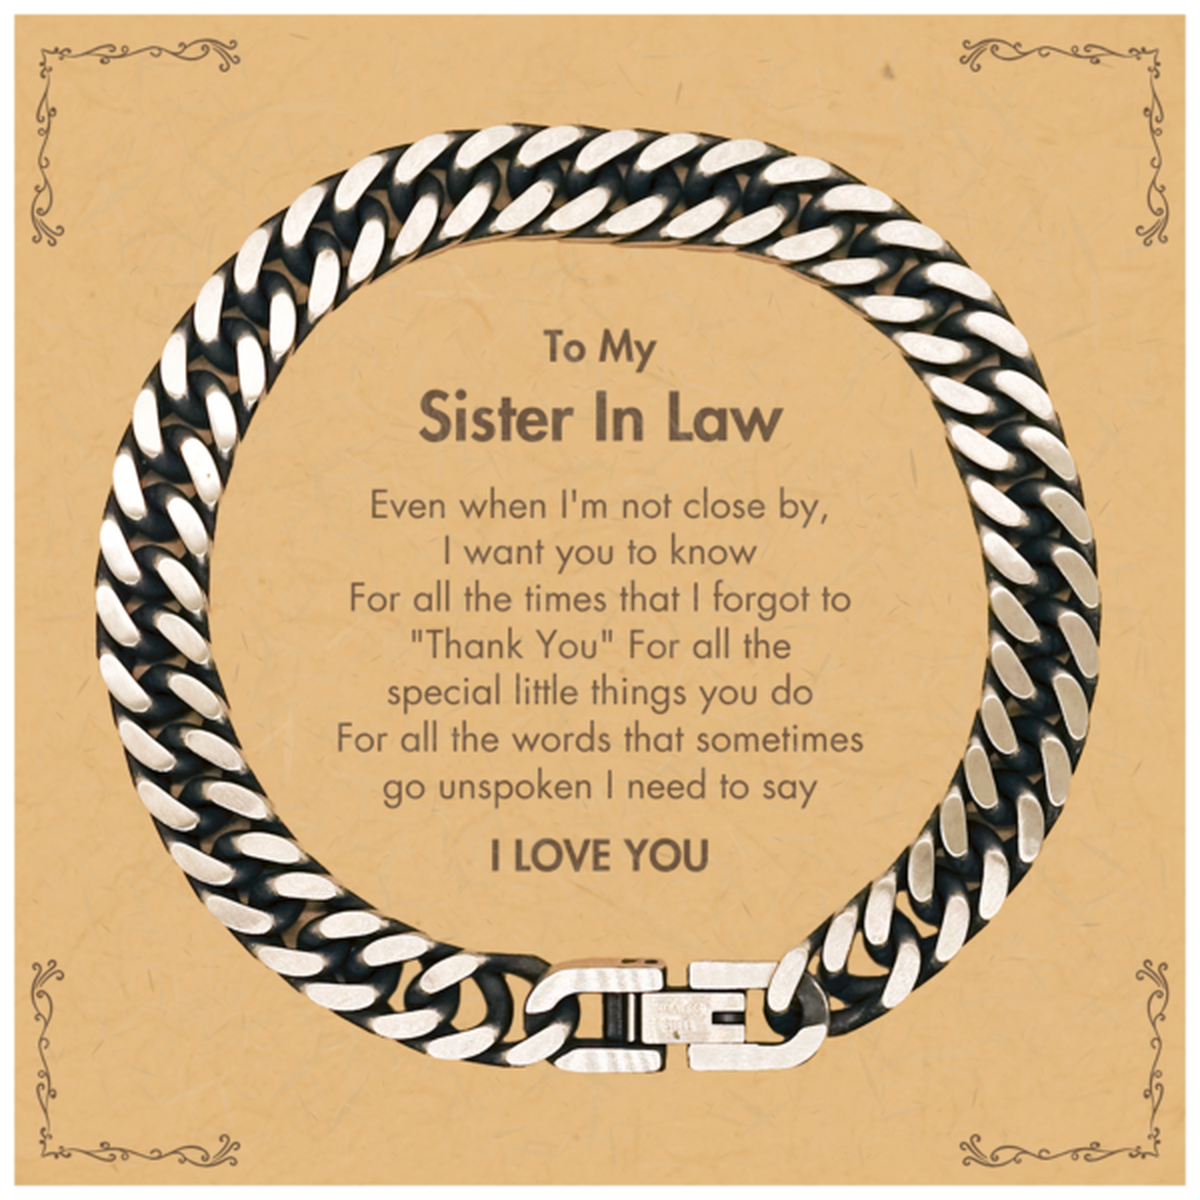 Thank You Gifts for Sister In Law, Keepsake Cuban Link Chain Bracelet Gifts for Sister In Law Birthday Mother's day Father's Day Sister In Law For all the words That sometimes go unspoken I need to say I LOVE YOU